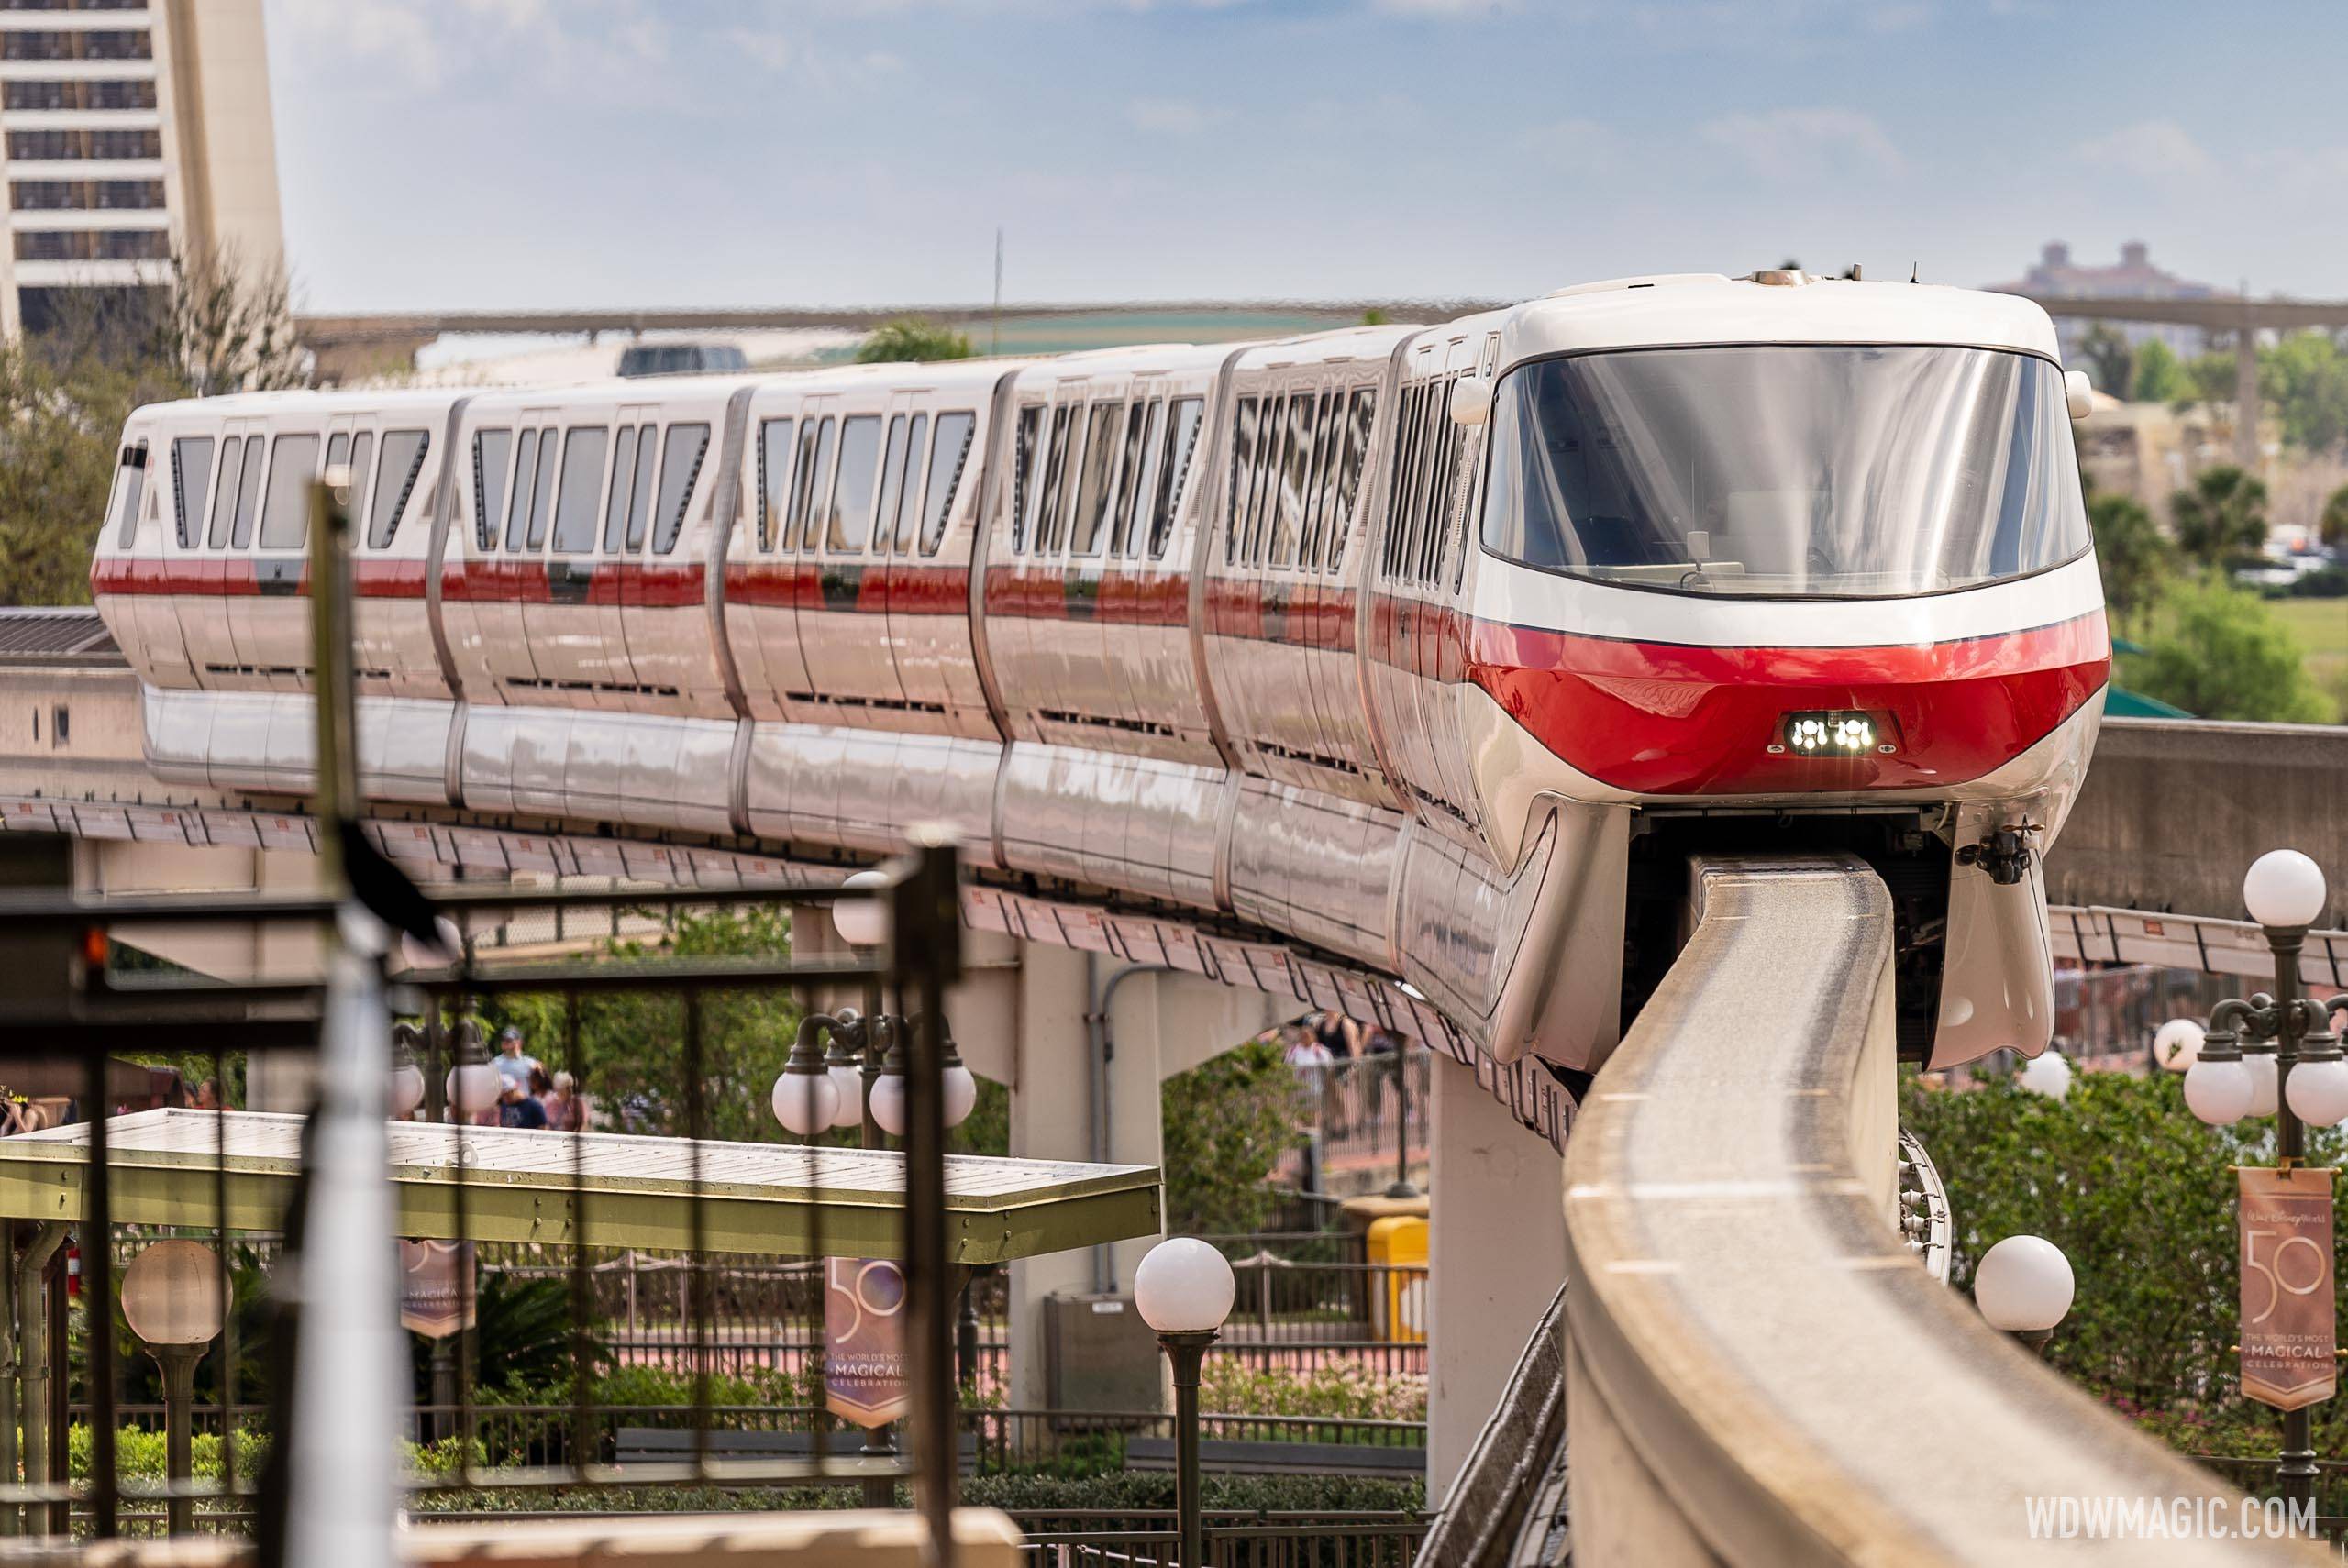 Monorail system to close during non peak times for maintenance in early 2014